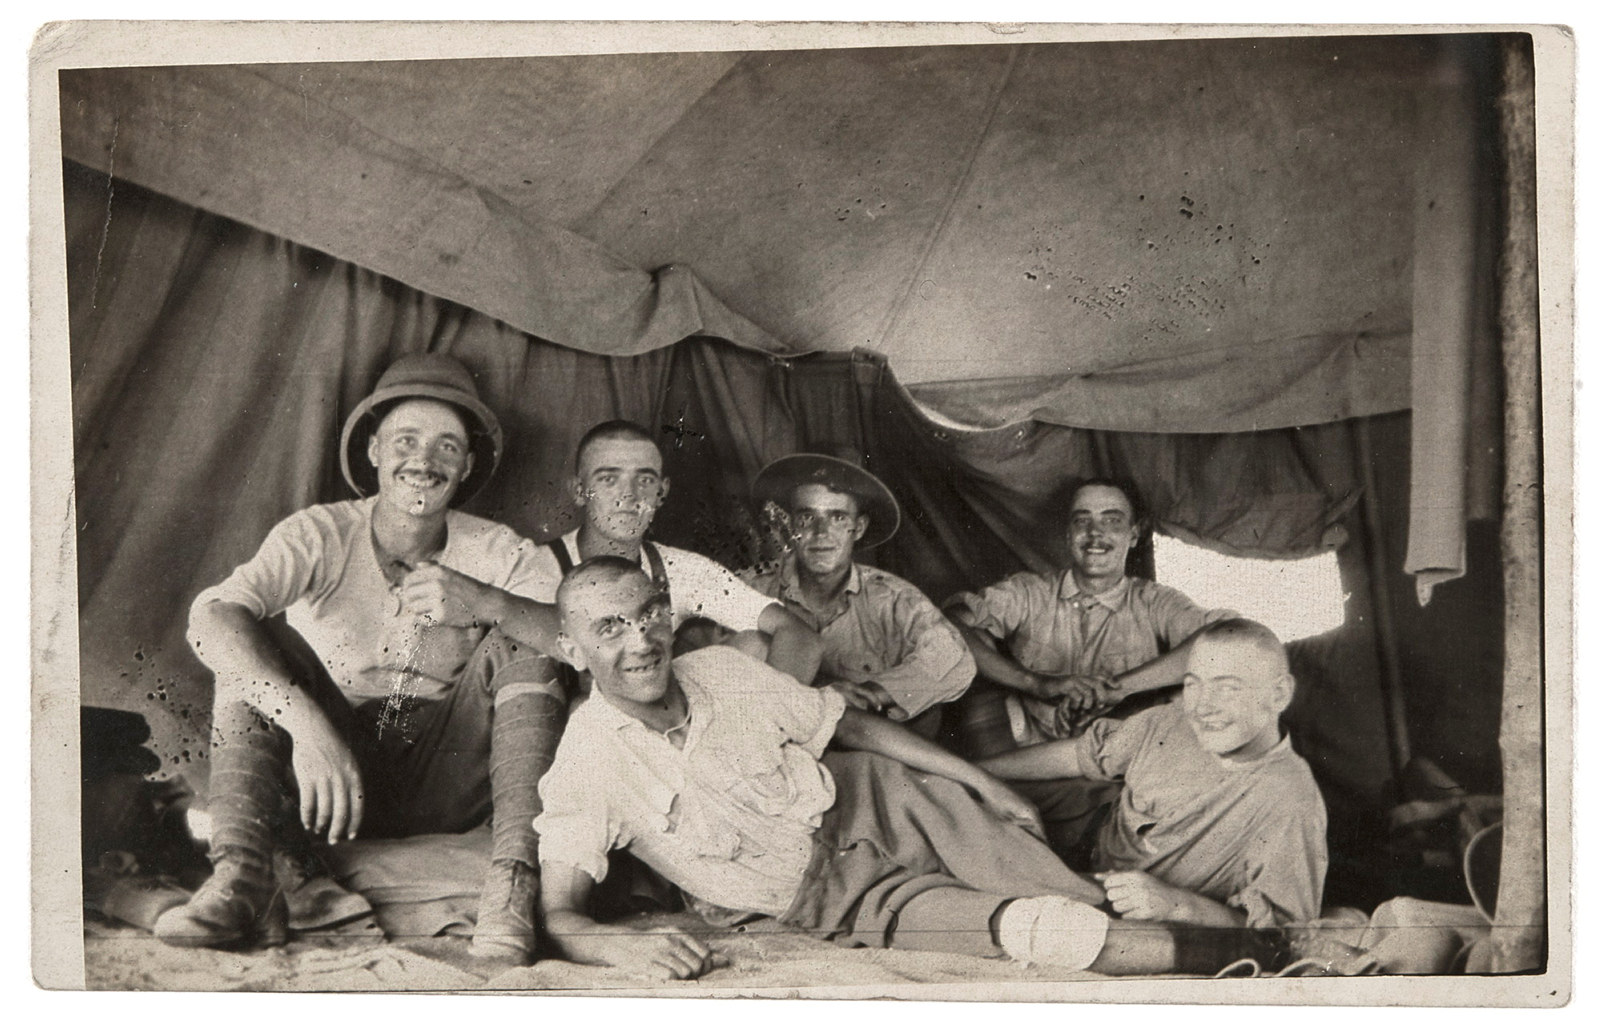 Postcard of Fred Gallagher (seated 2nd from left) with five other soldiers,  from an album compiled by Mary (Girlie) Andersen, 1915